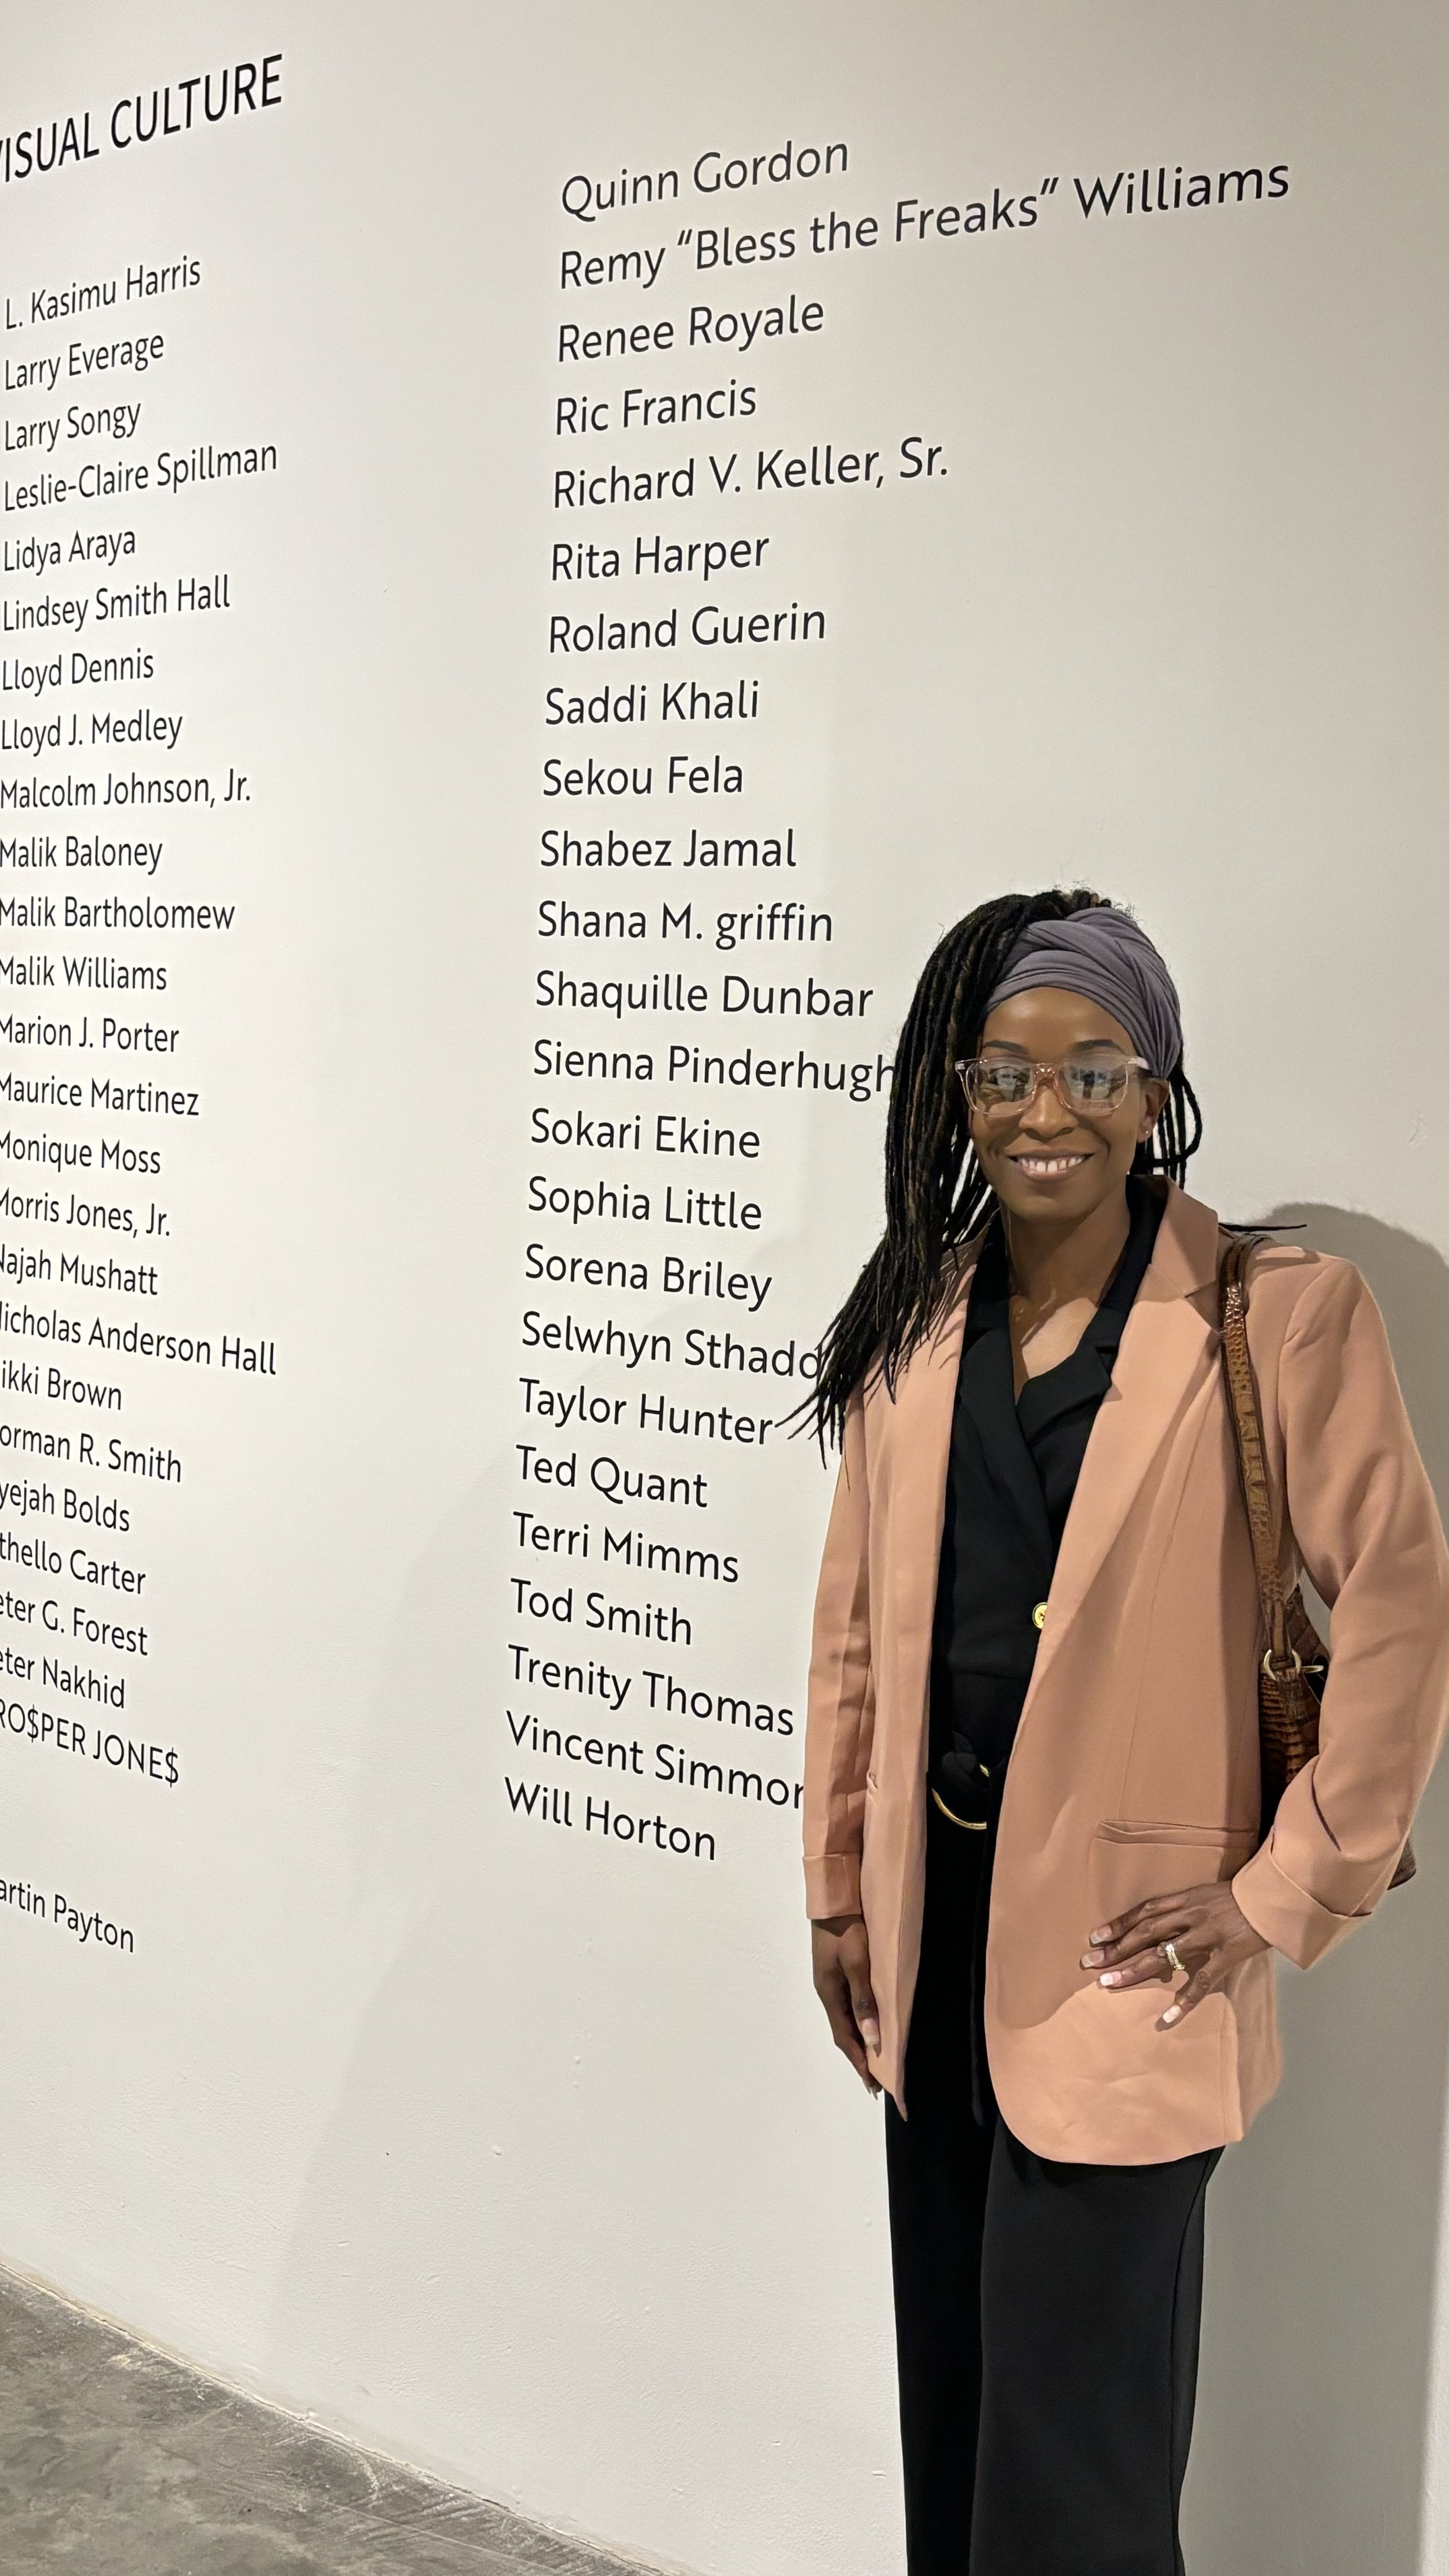 Photographer Sorena Briley smiling in front of the visual culture wall at the Contemporary Arts Center, with her name featured among esteemed artists.